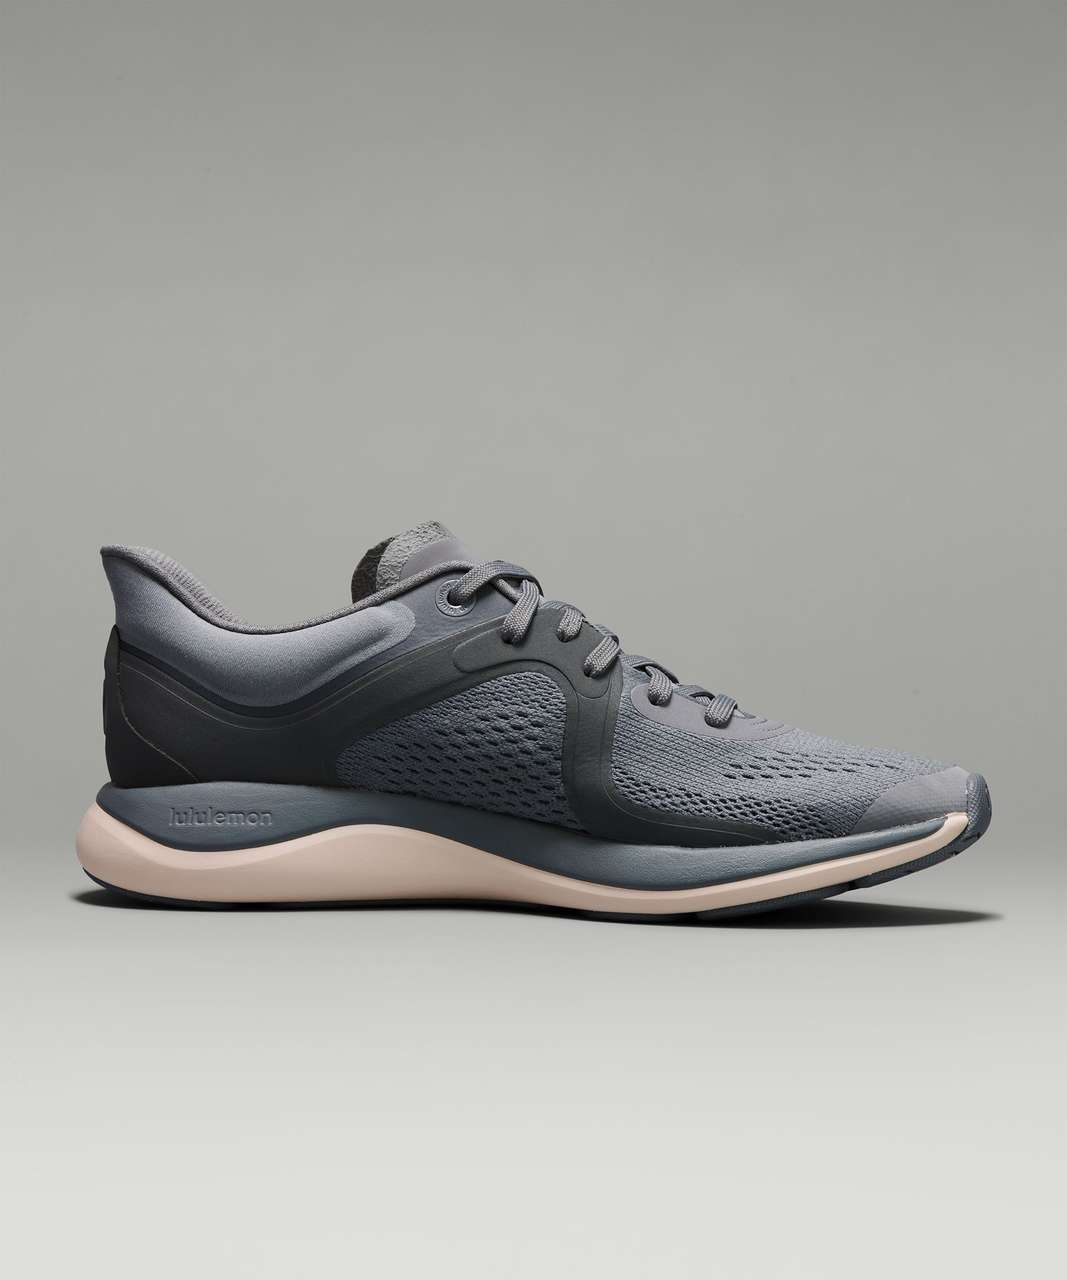 Lululemon Chargefeel Low Womens Workout Shoe - Anchor / Graphite Grey ...